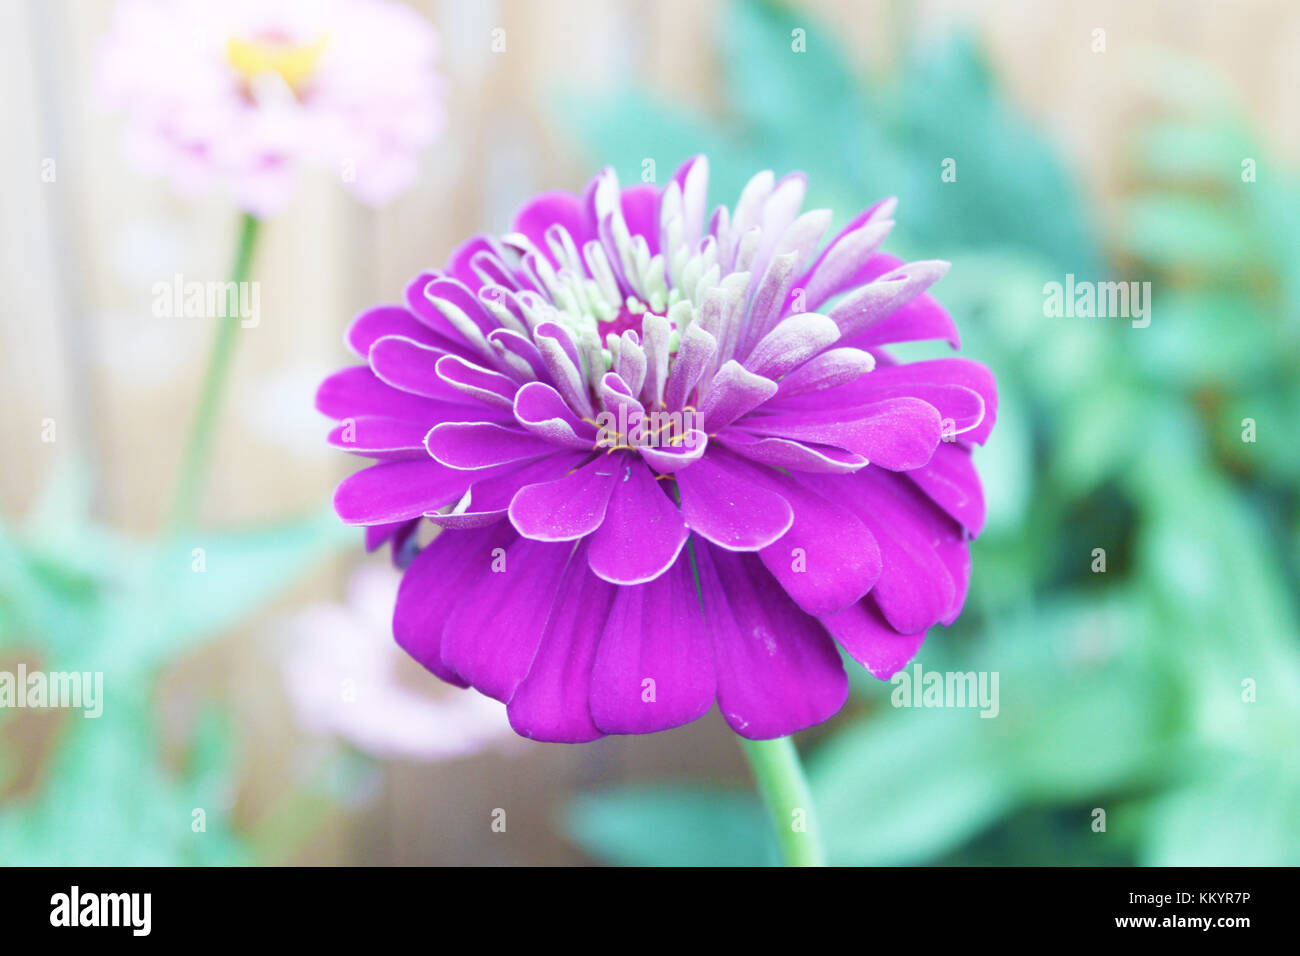 Bright purple zinnia with white center against blurred pastel ...